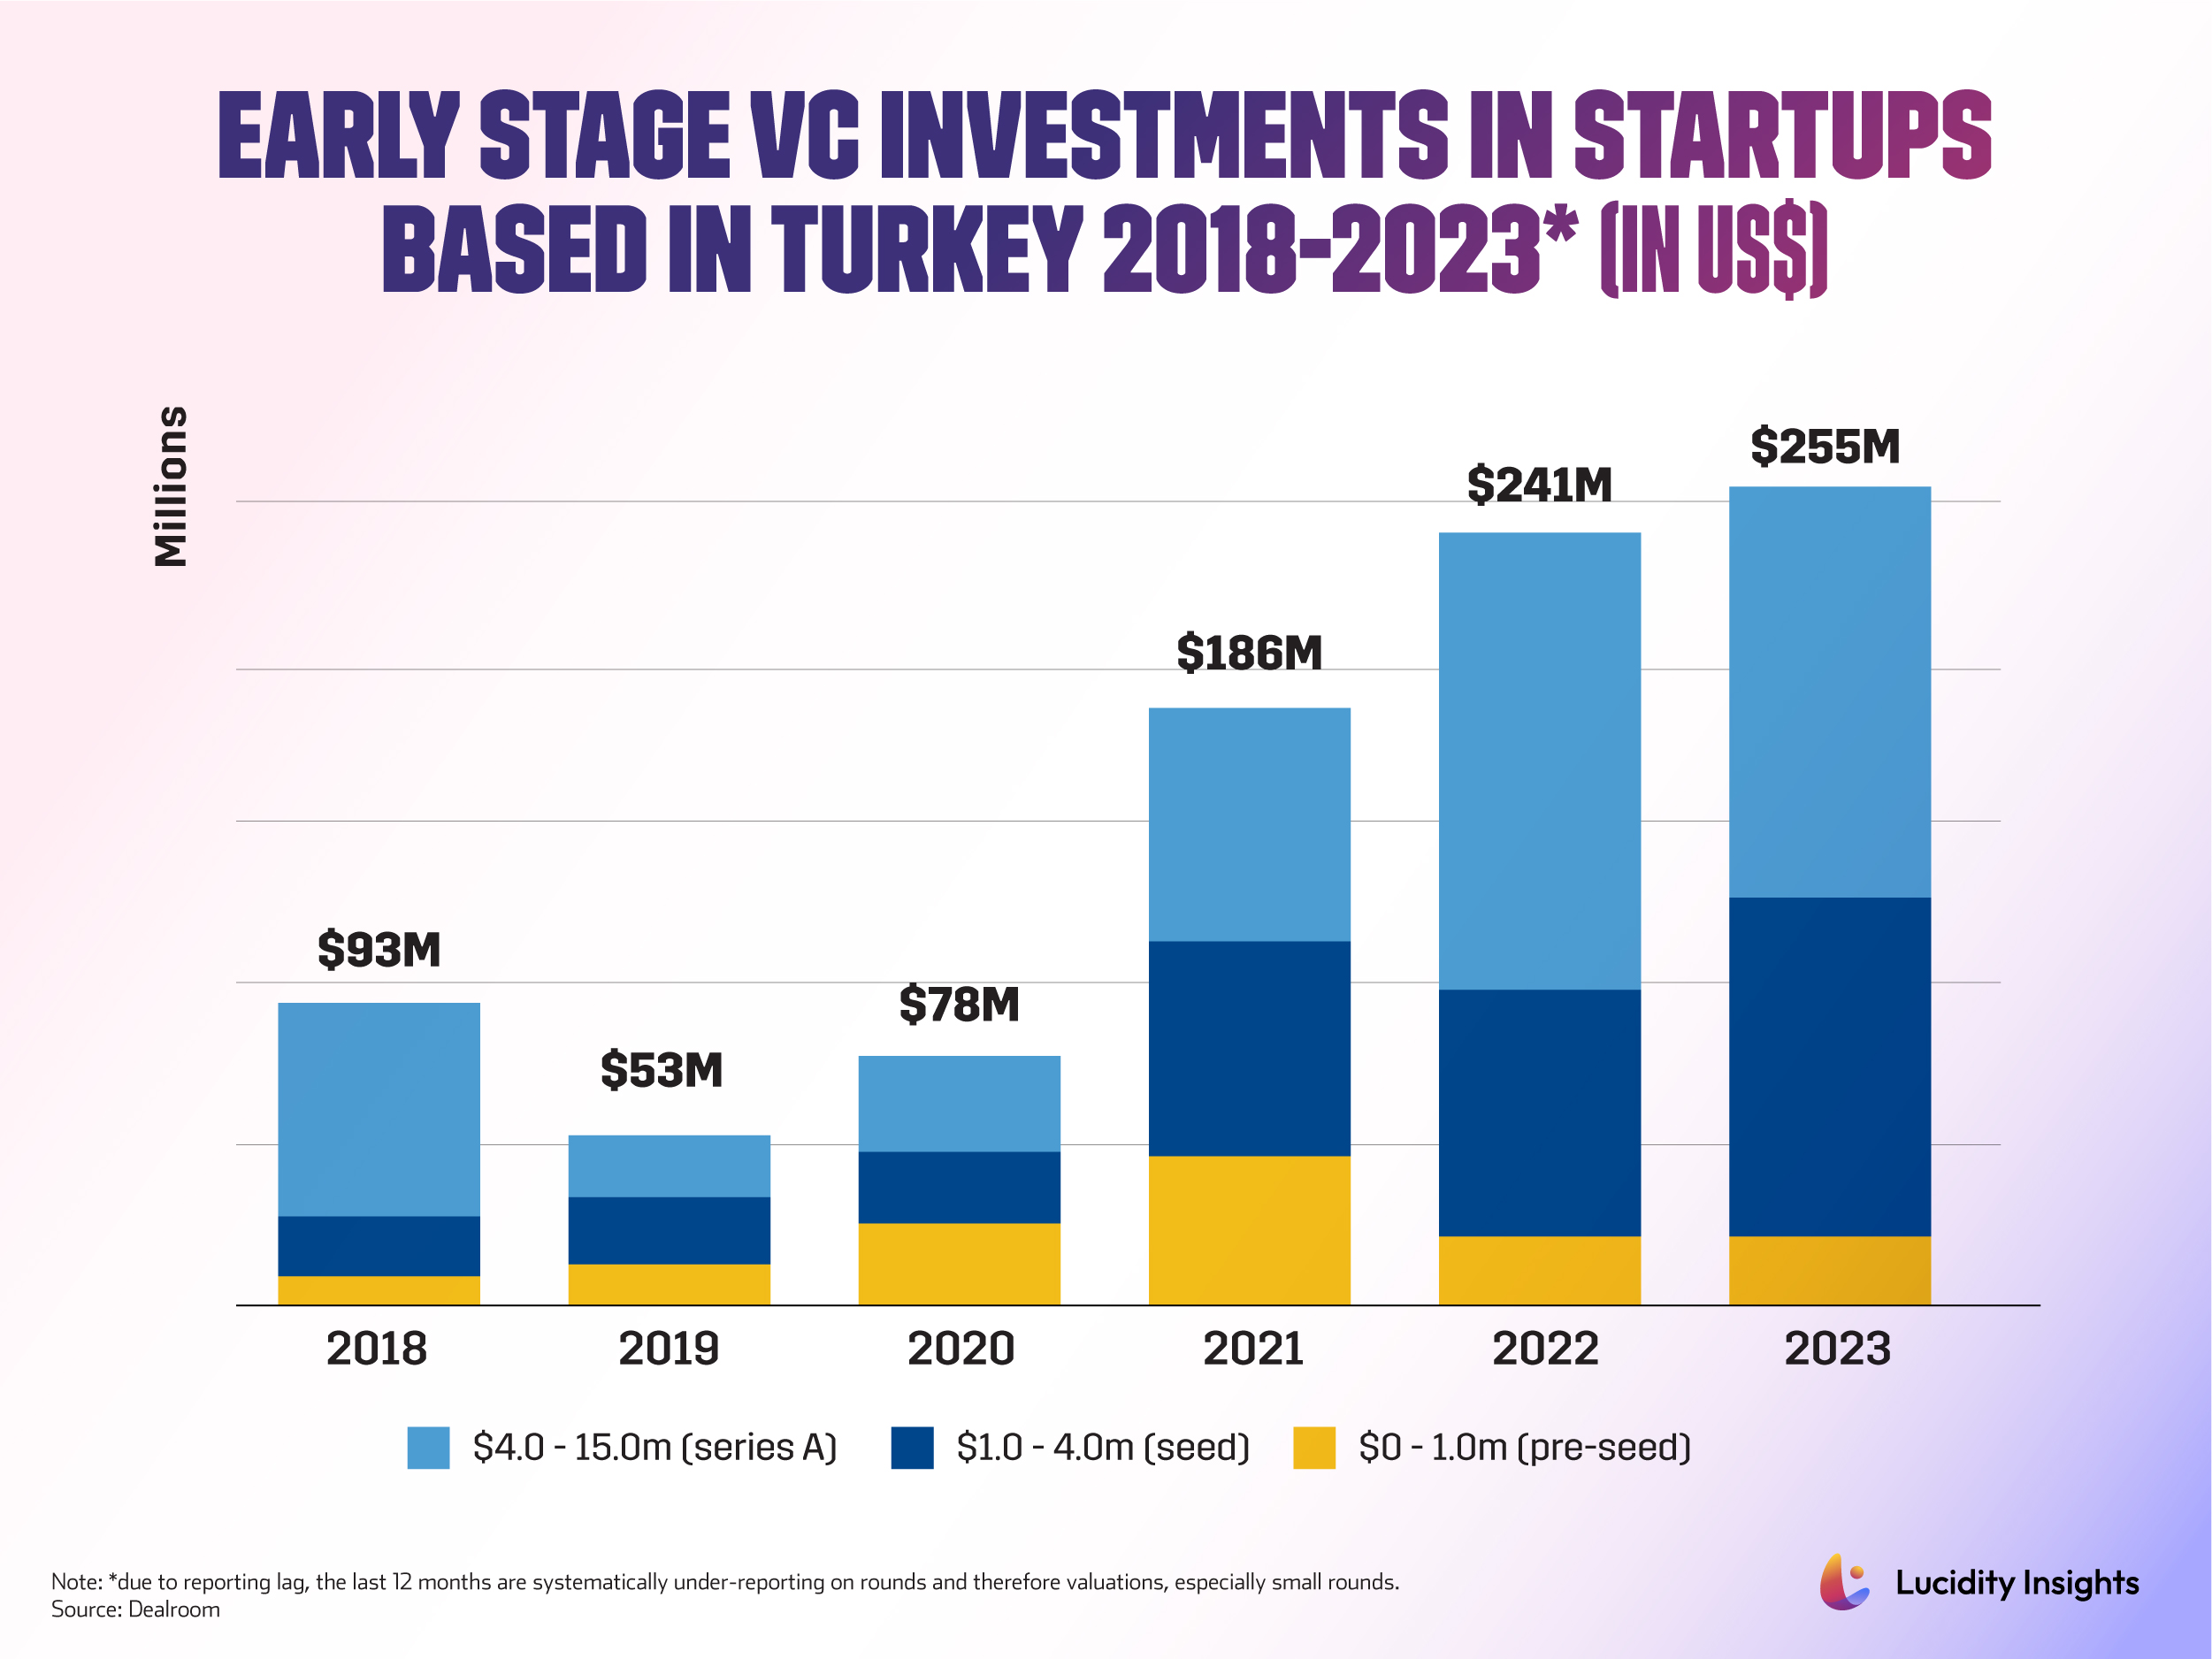 Early Stage VC Investments in Startups Based in Turkey 2018-2023 (In US$ Million)